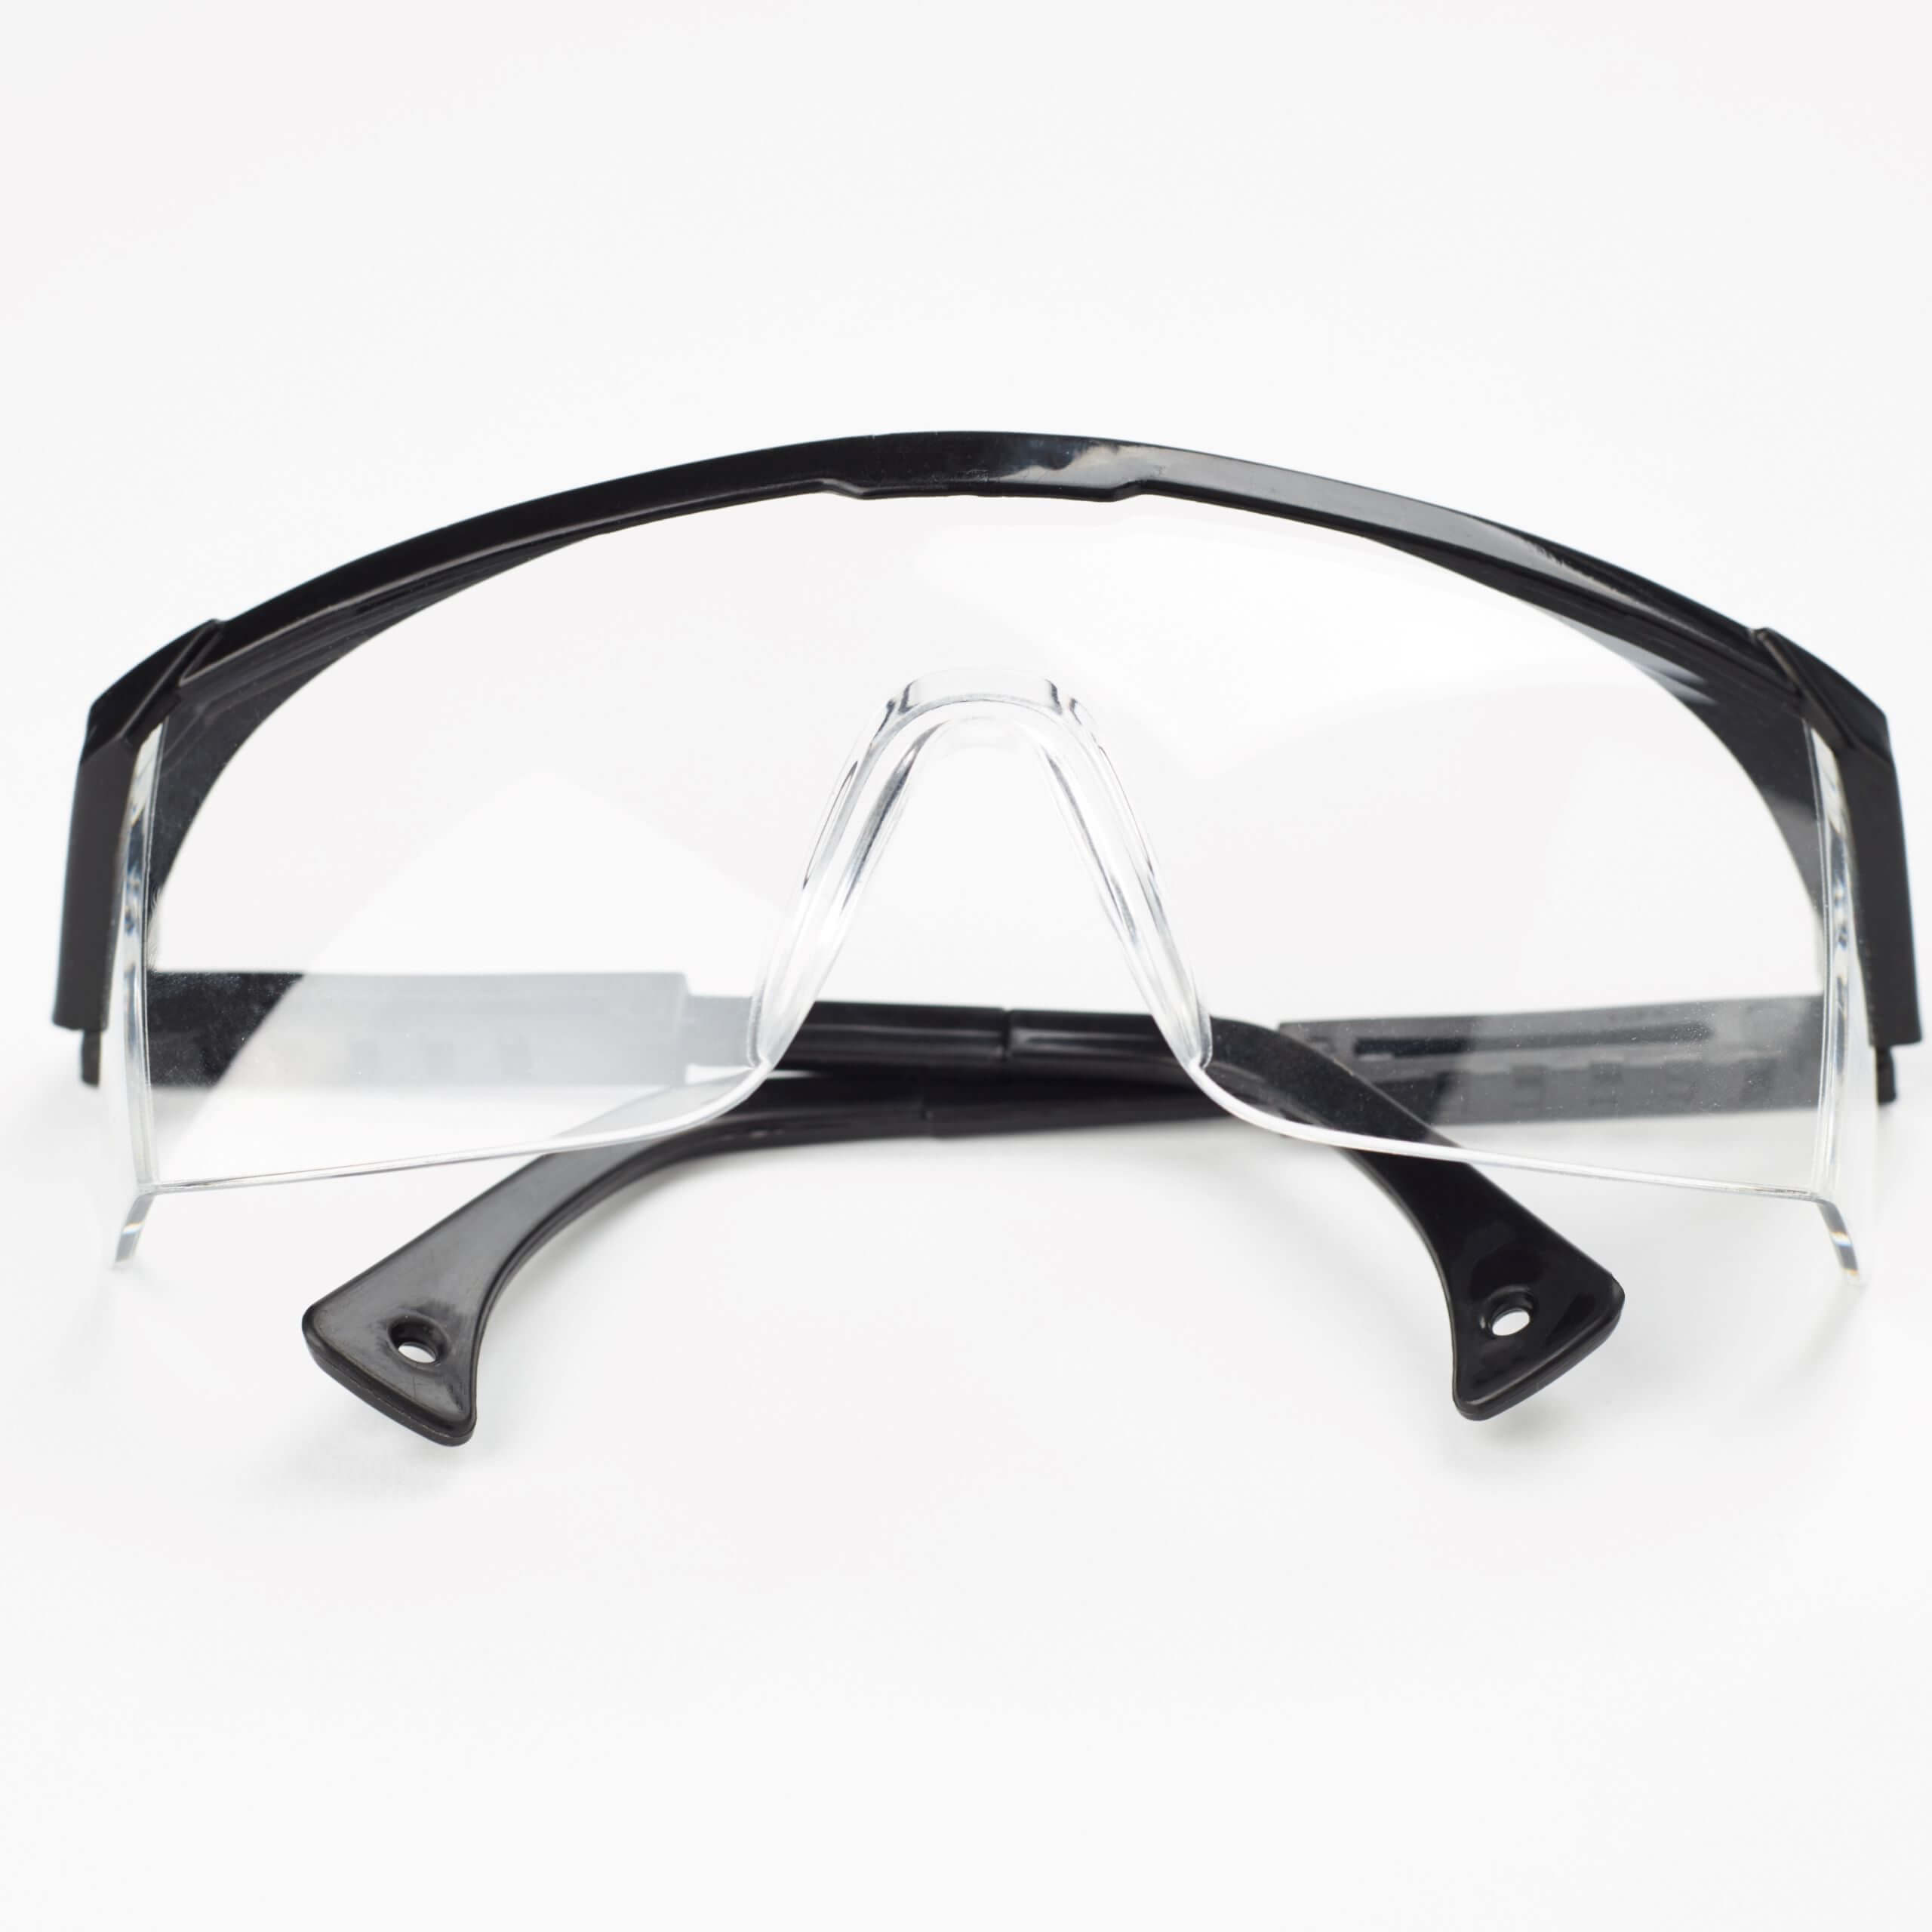 An image of a single pair of Eye Safety Glasses.